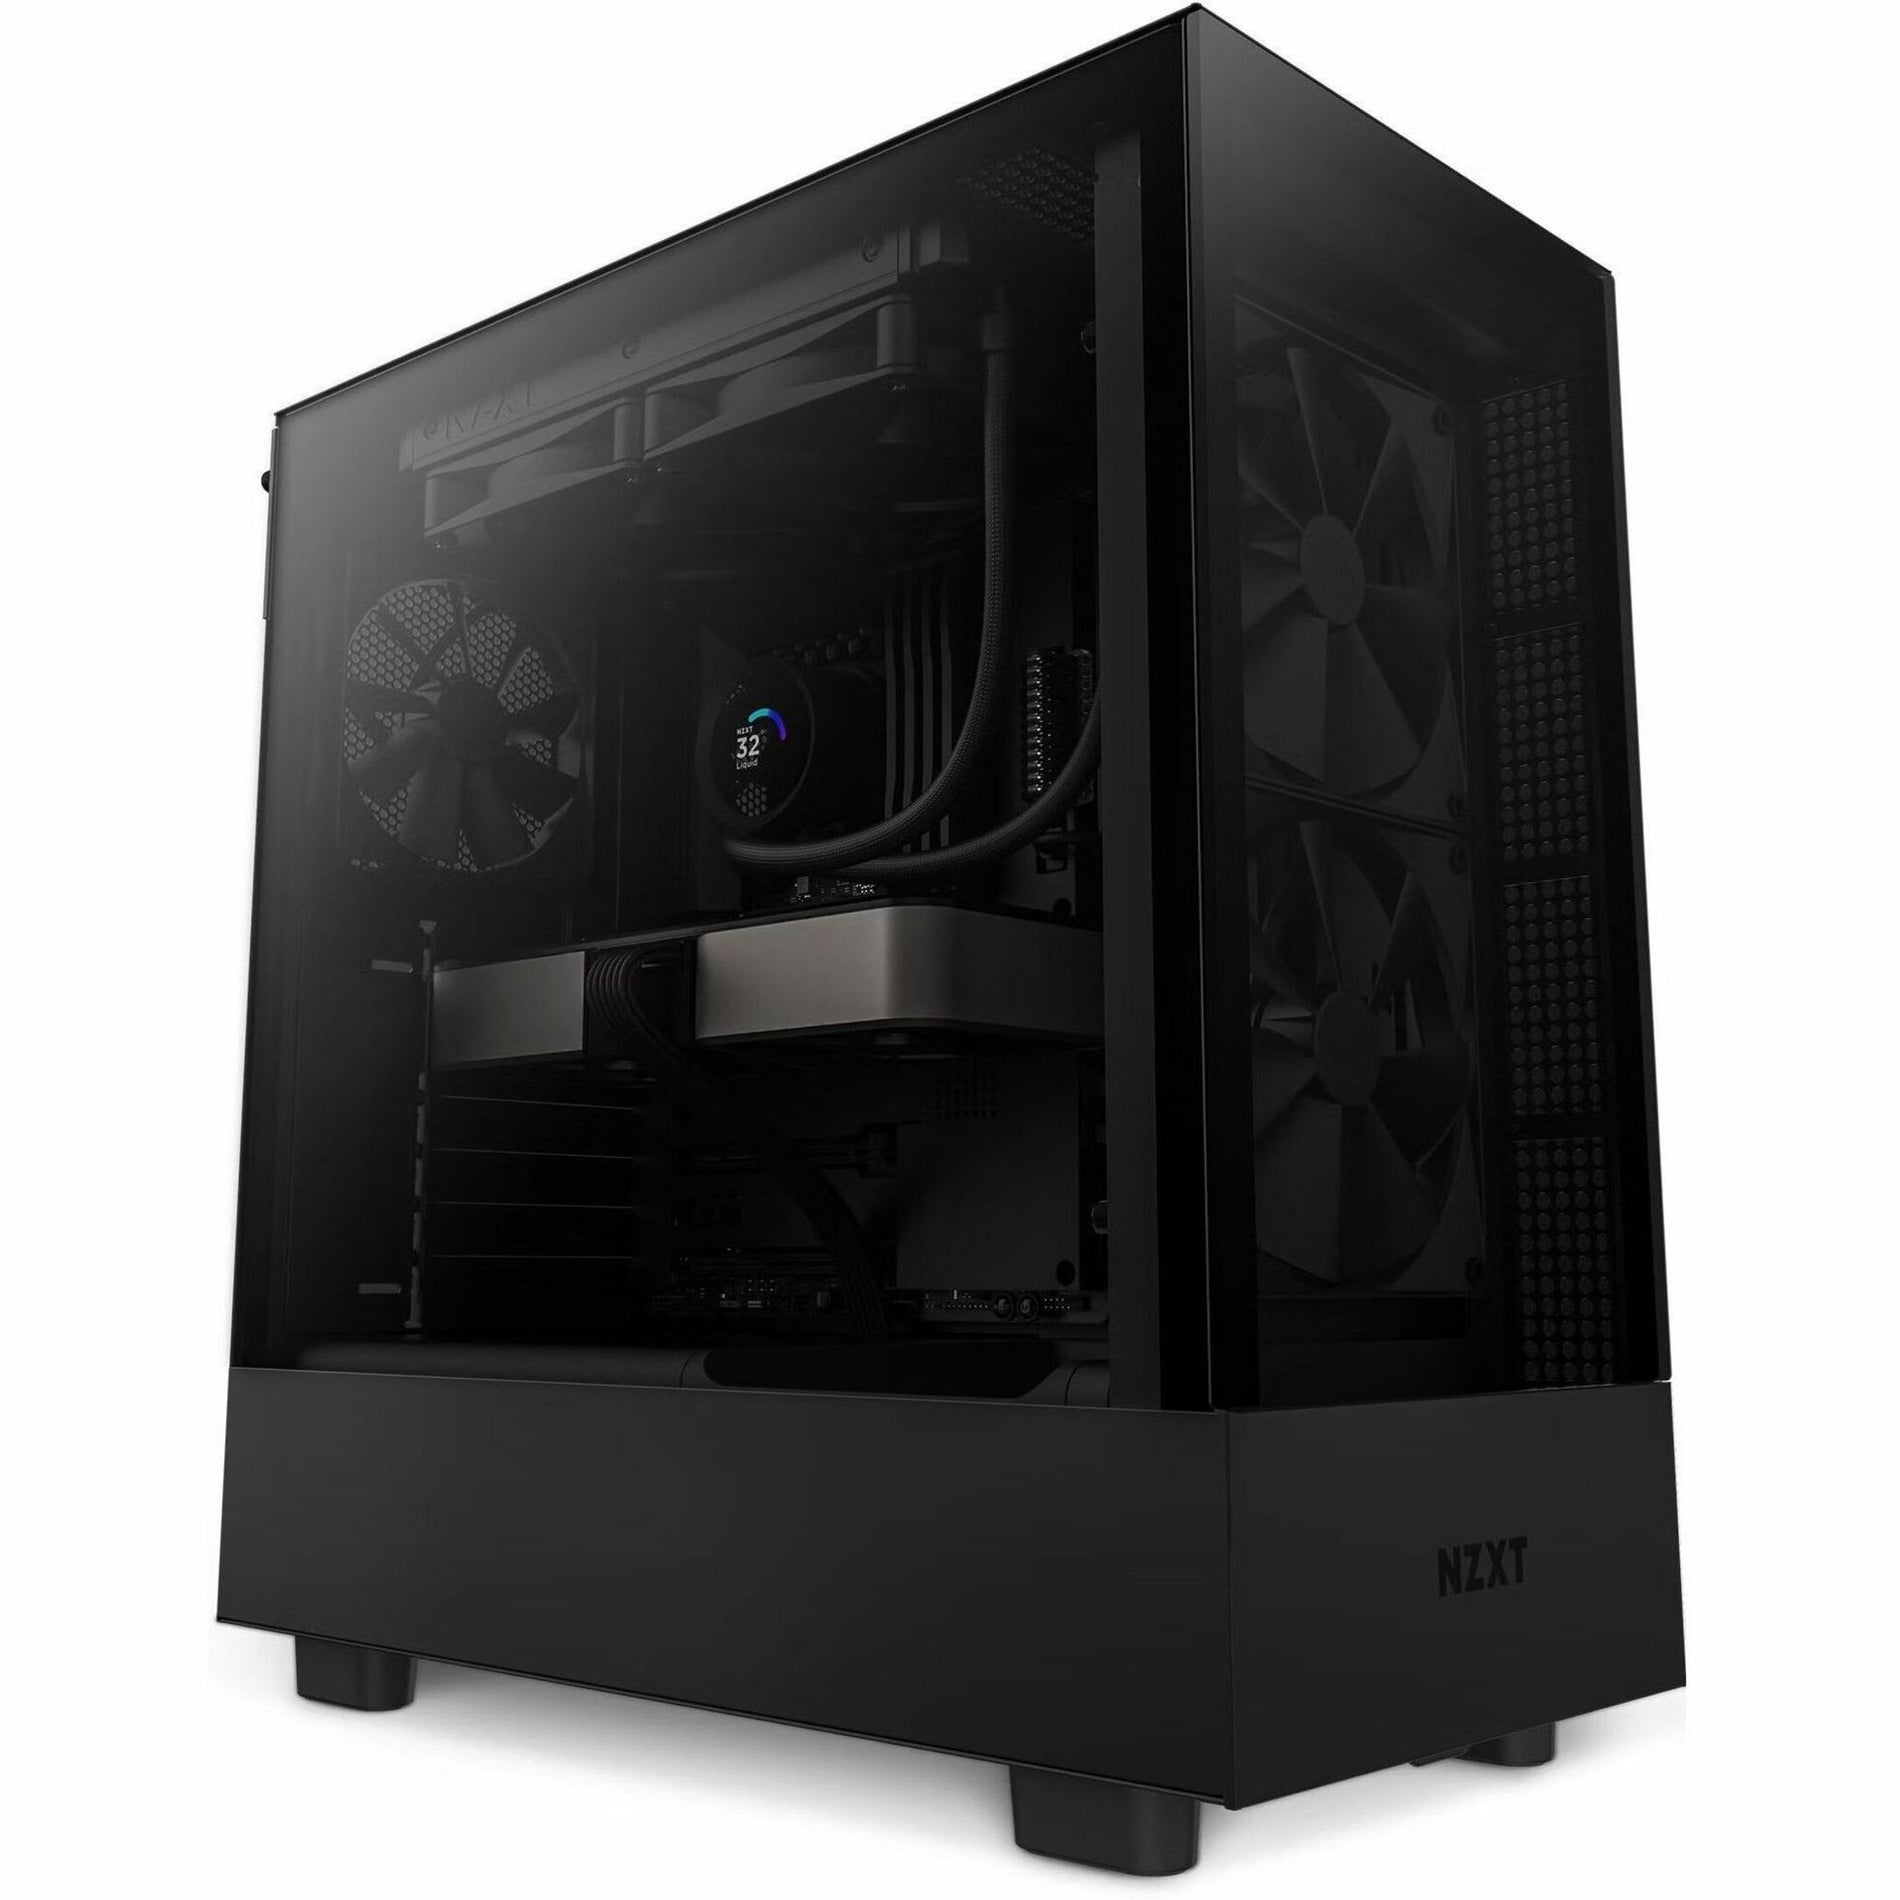 NZXT RL-KN240-B1 Kraken 240 240mm AIO Liquid Cooler with LCD Display, High Performance Cooling Solution